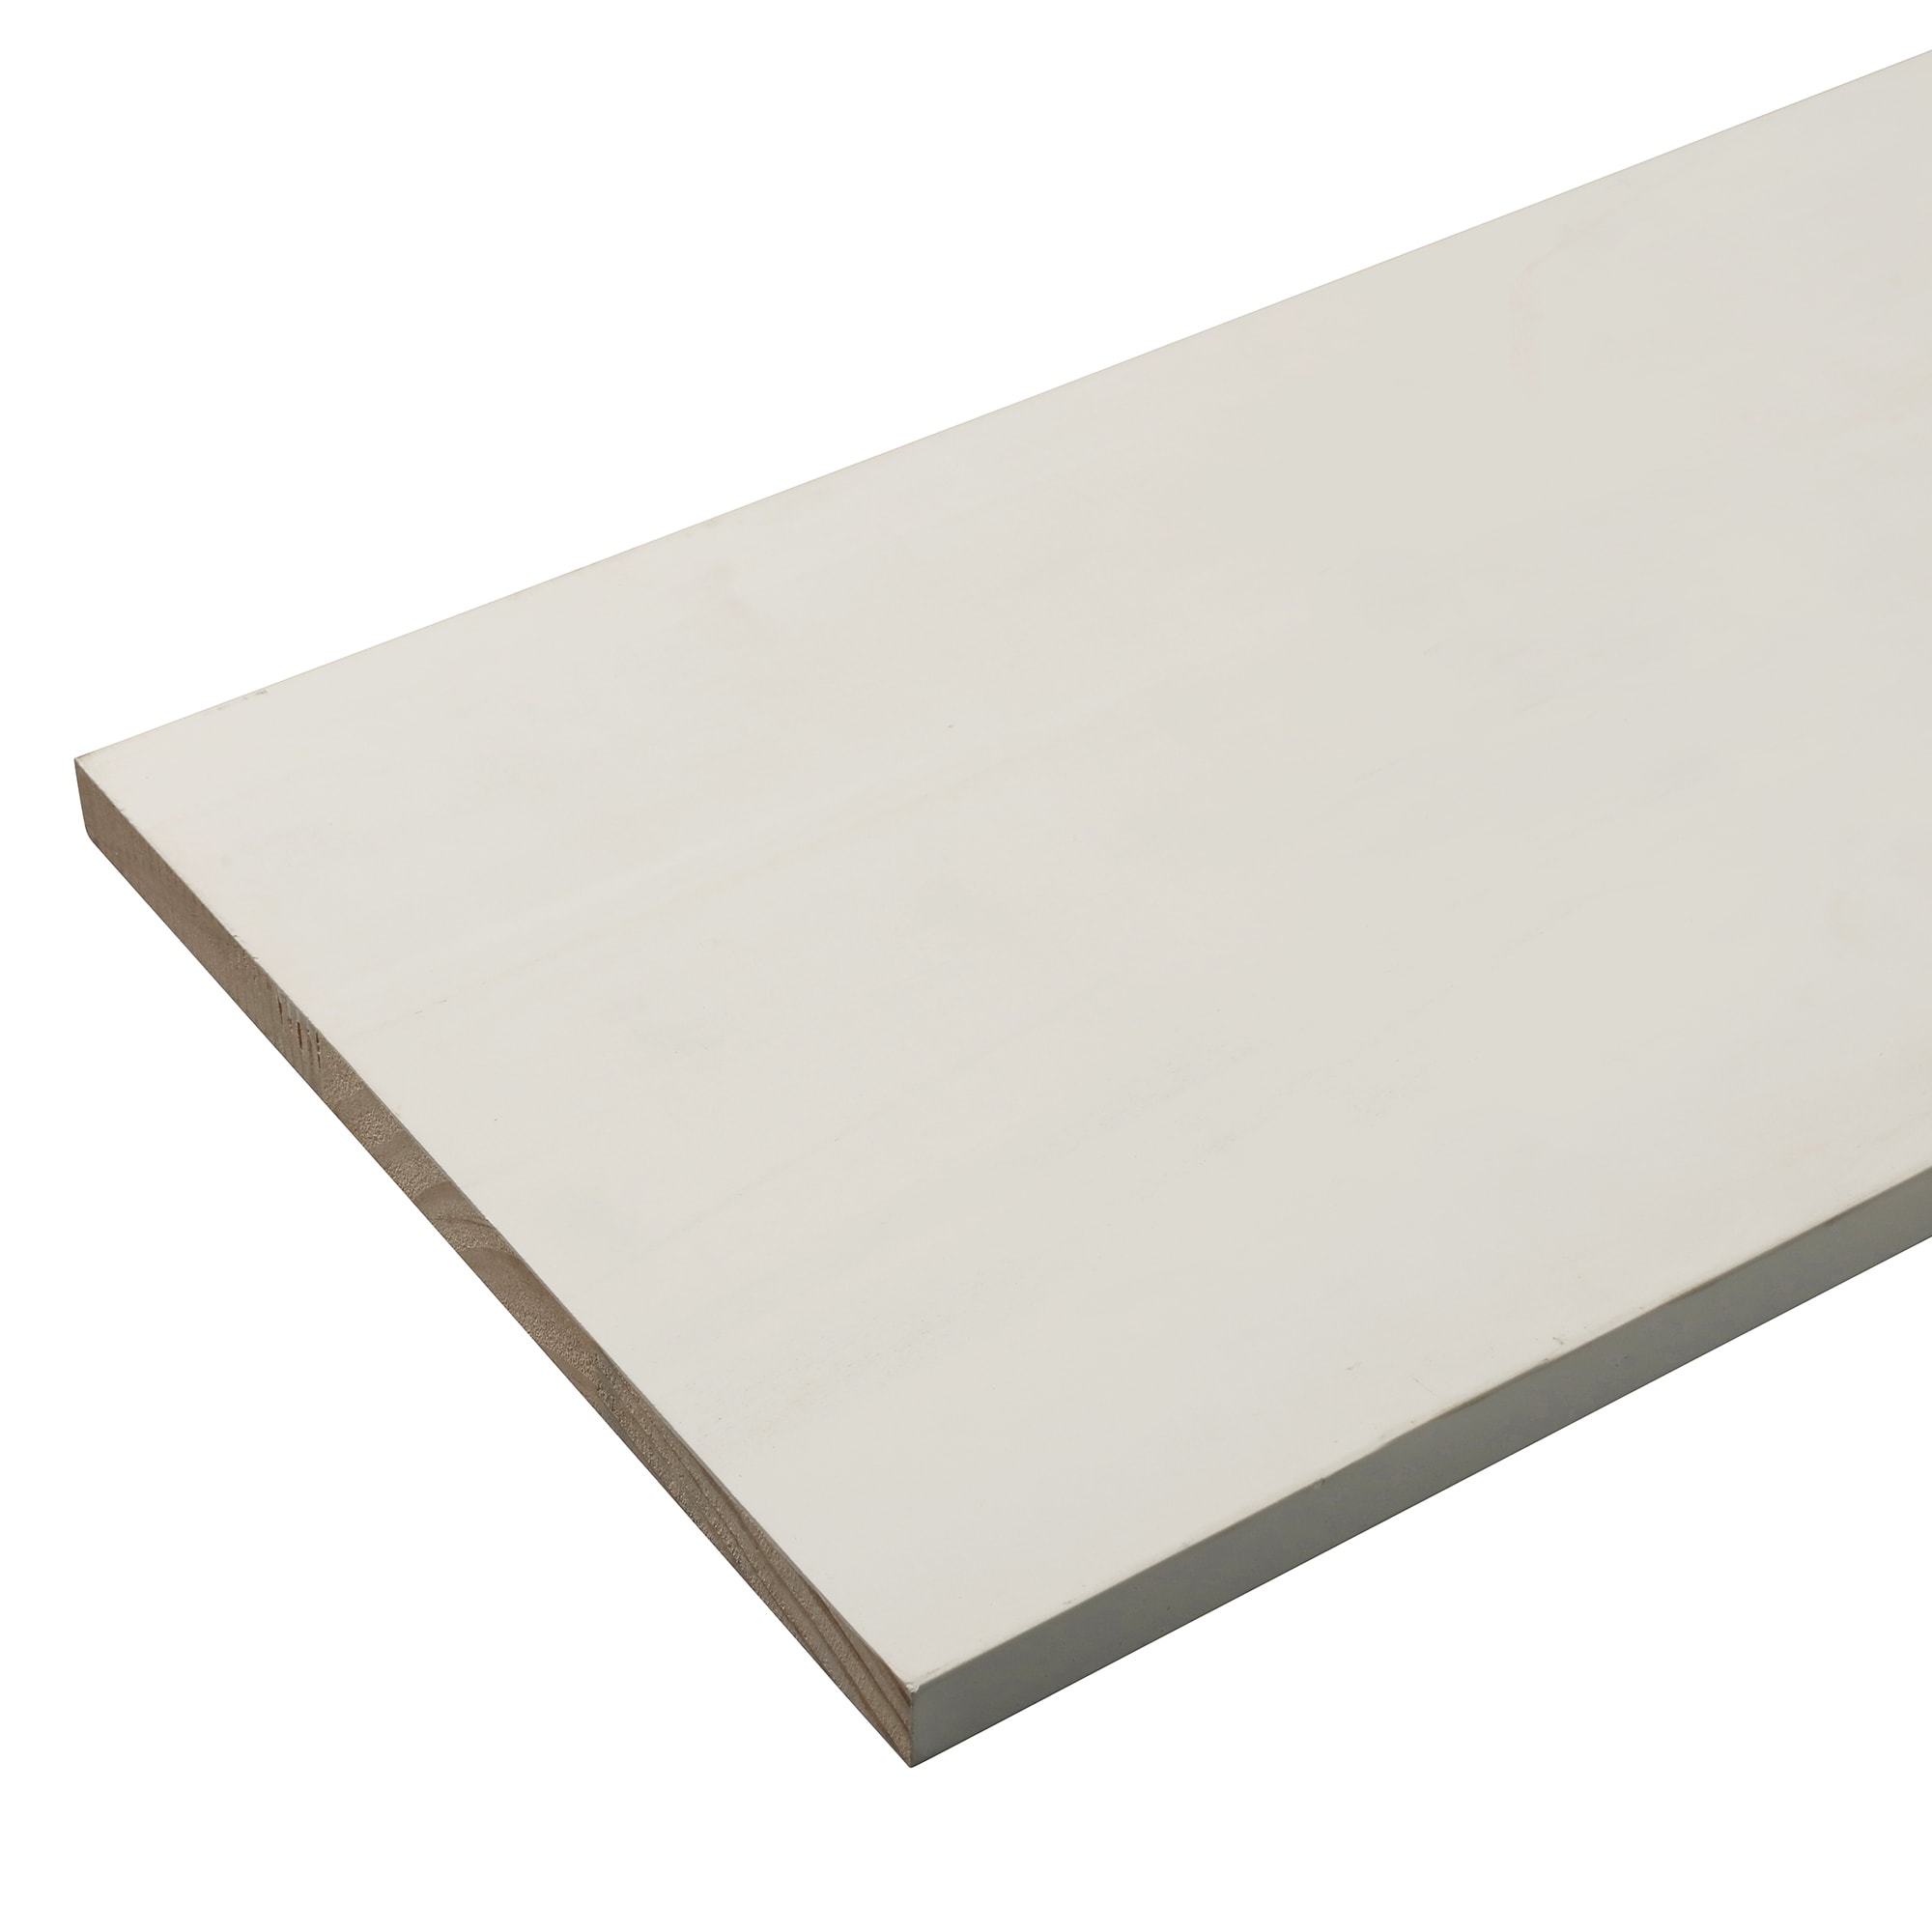 RELIABILT 1-in x 8-in x 8-ft Painted MDF Board in the Appearance